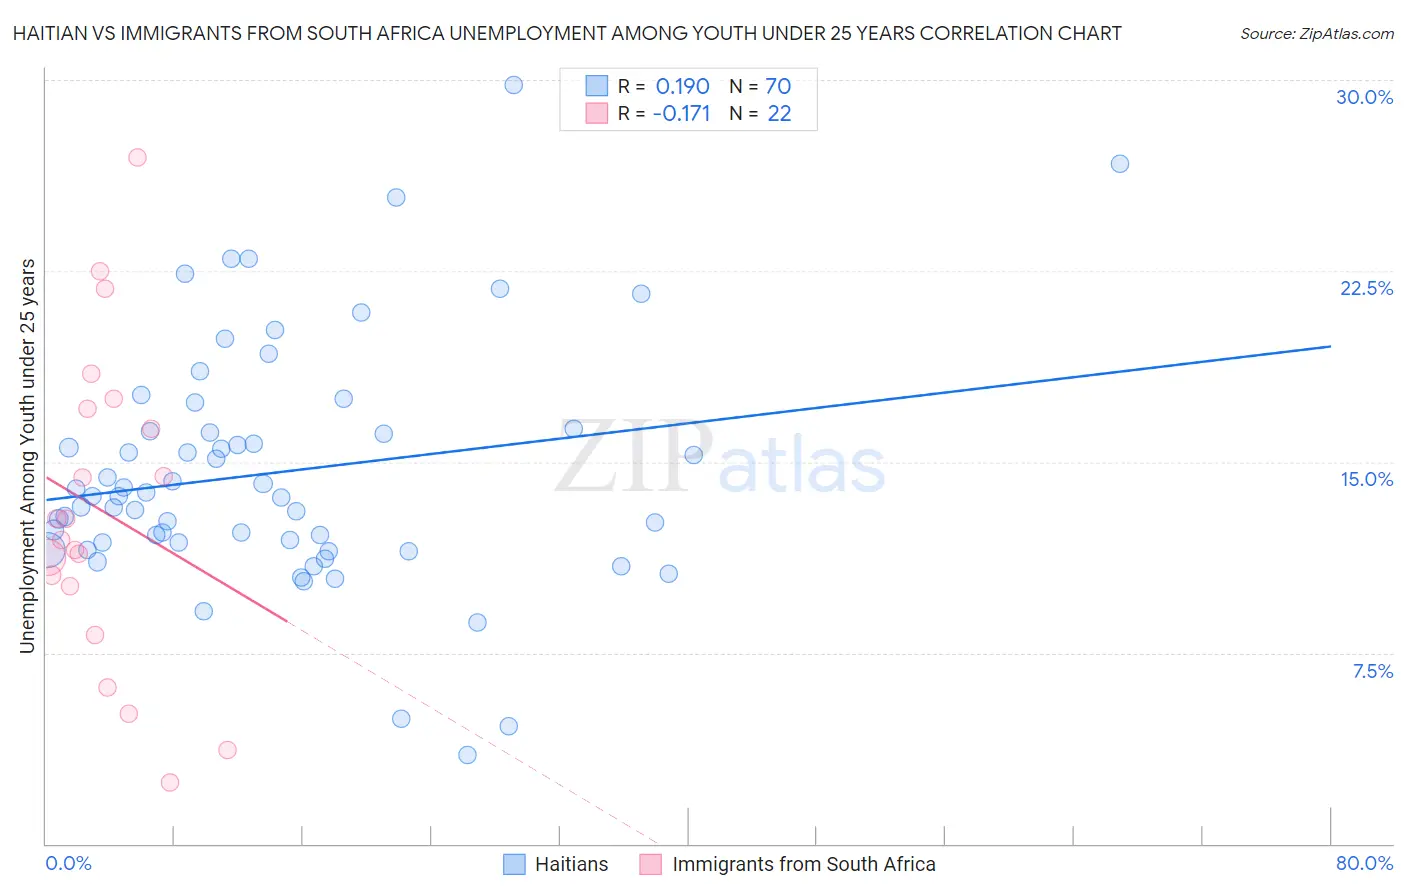 Haitian vs Immigrants from South Africa Unemployment Among Youth under 25 years